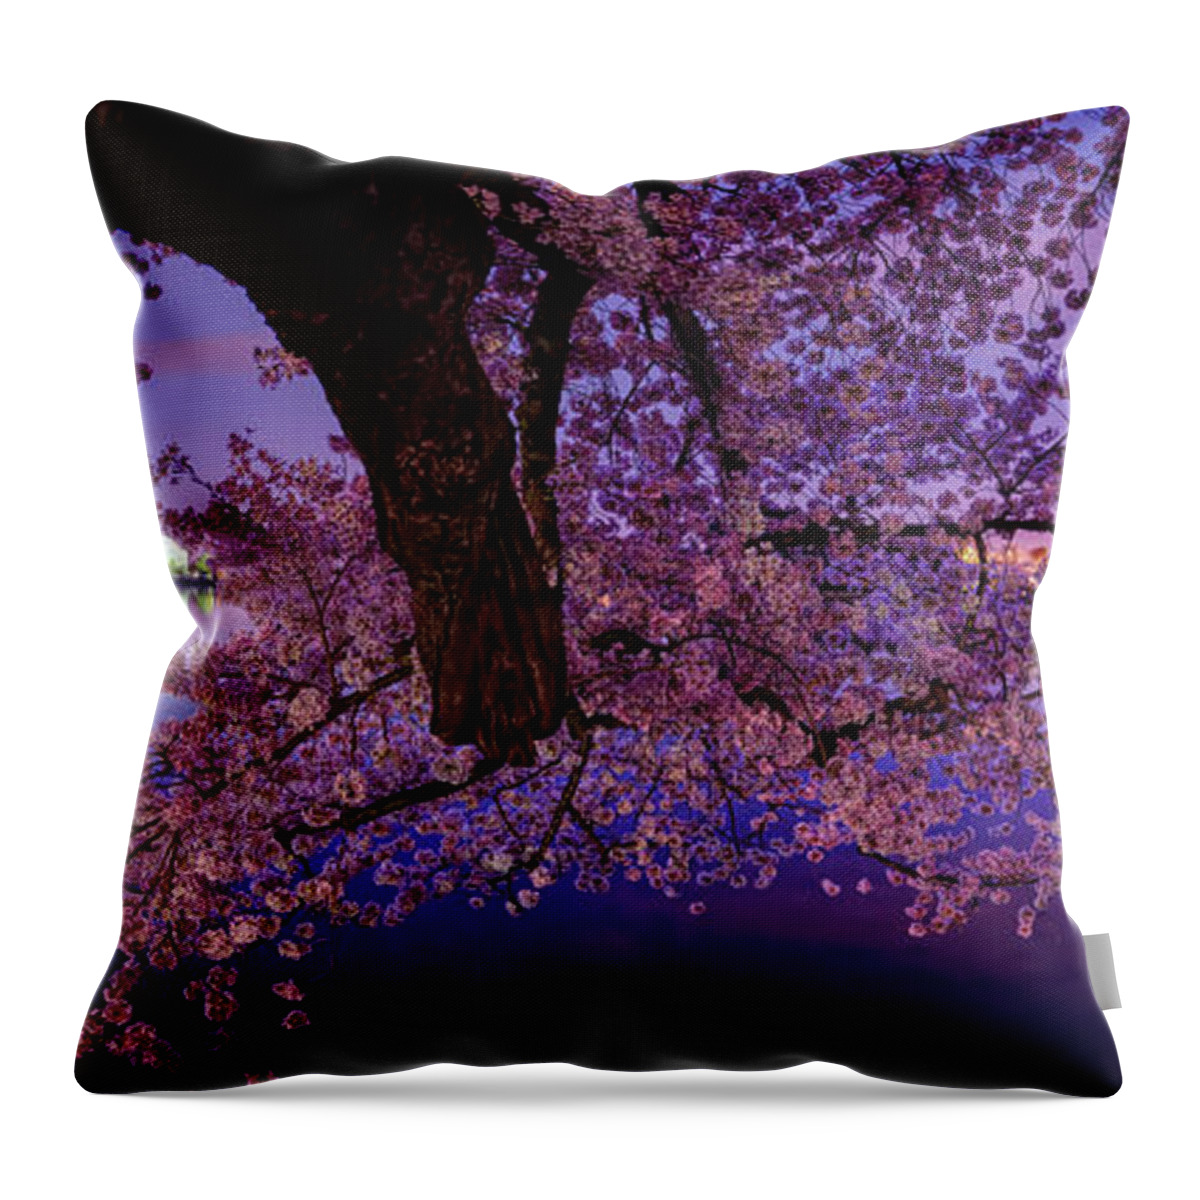 Dc Throw Pillow featuring the photograph Night Blossoms by Metro DC Photography